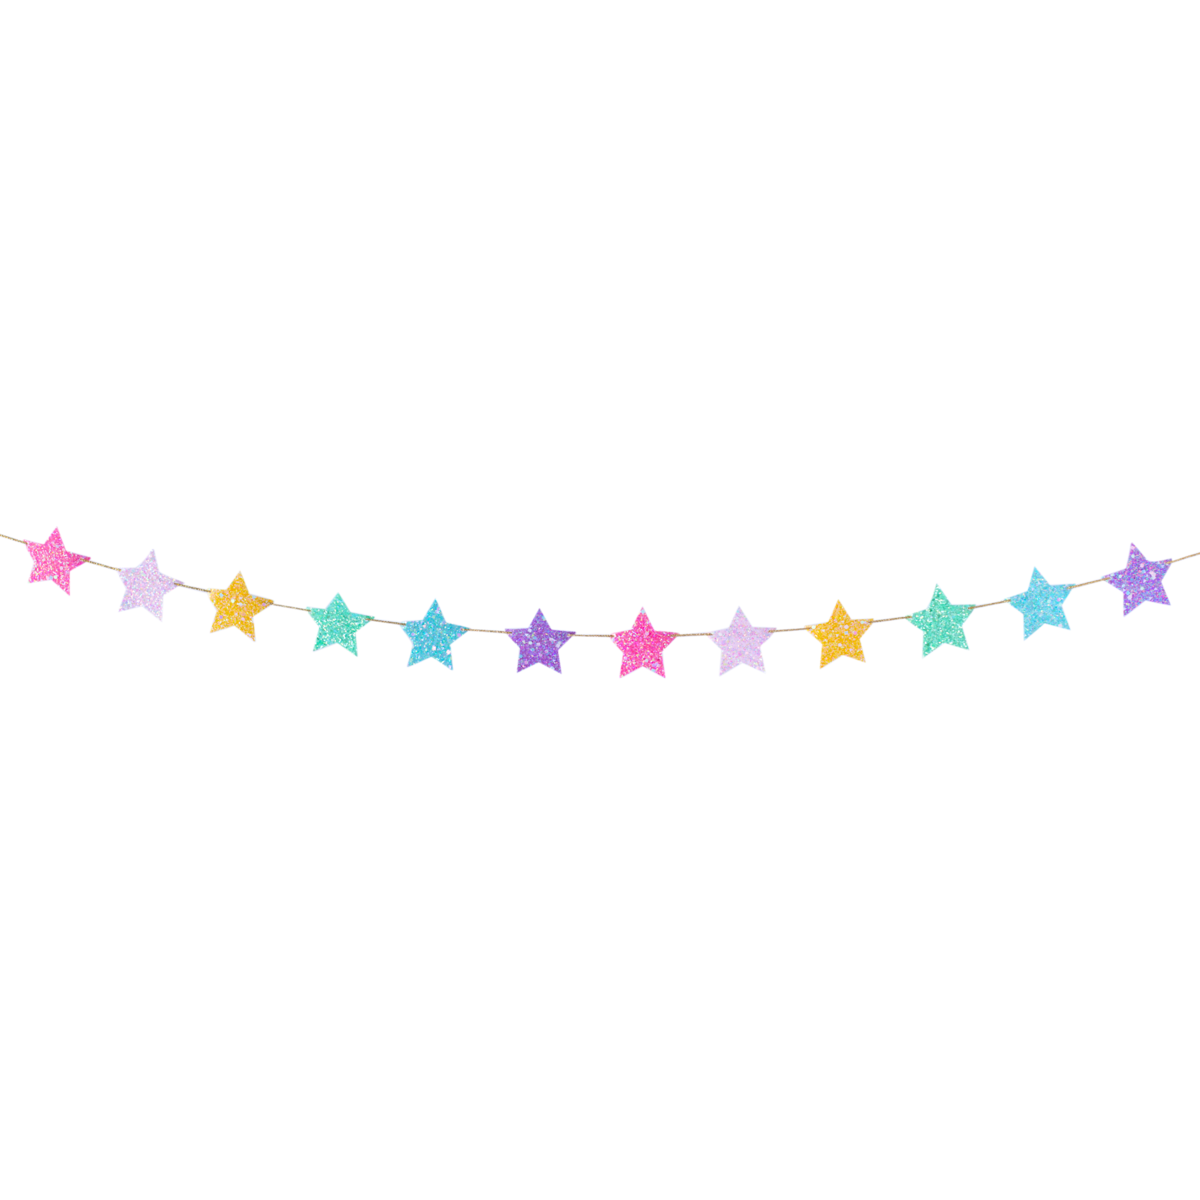 Whimsy Rainbow Colored Glittery Shining Stars Banner